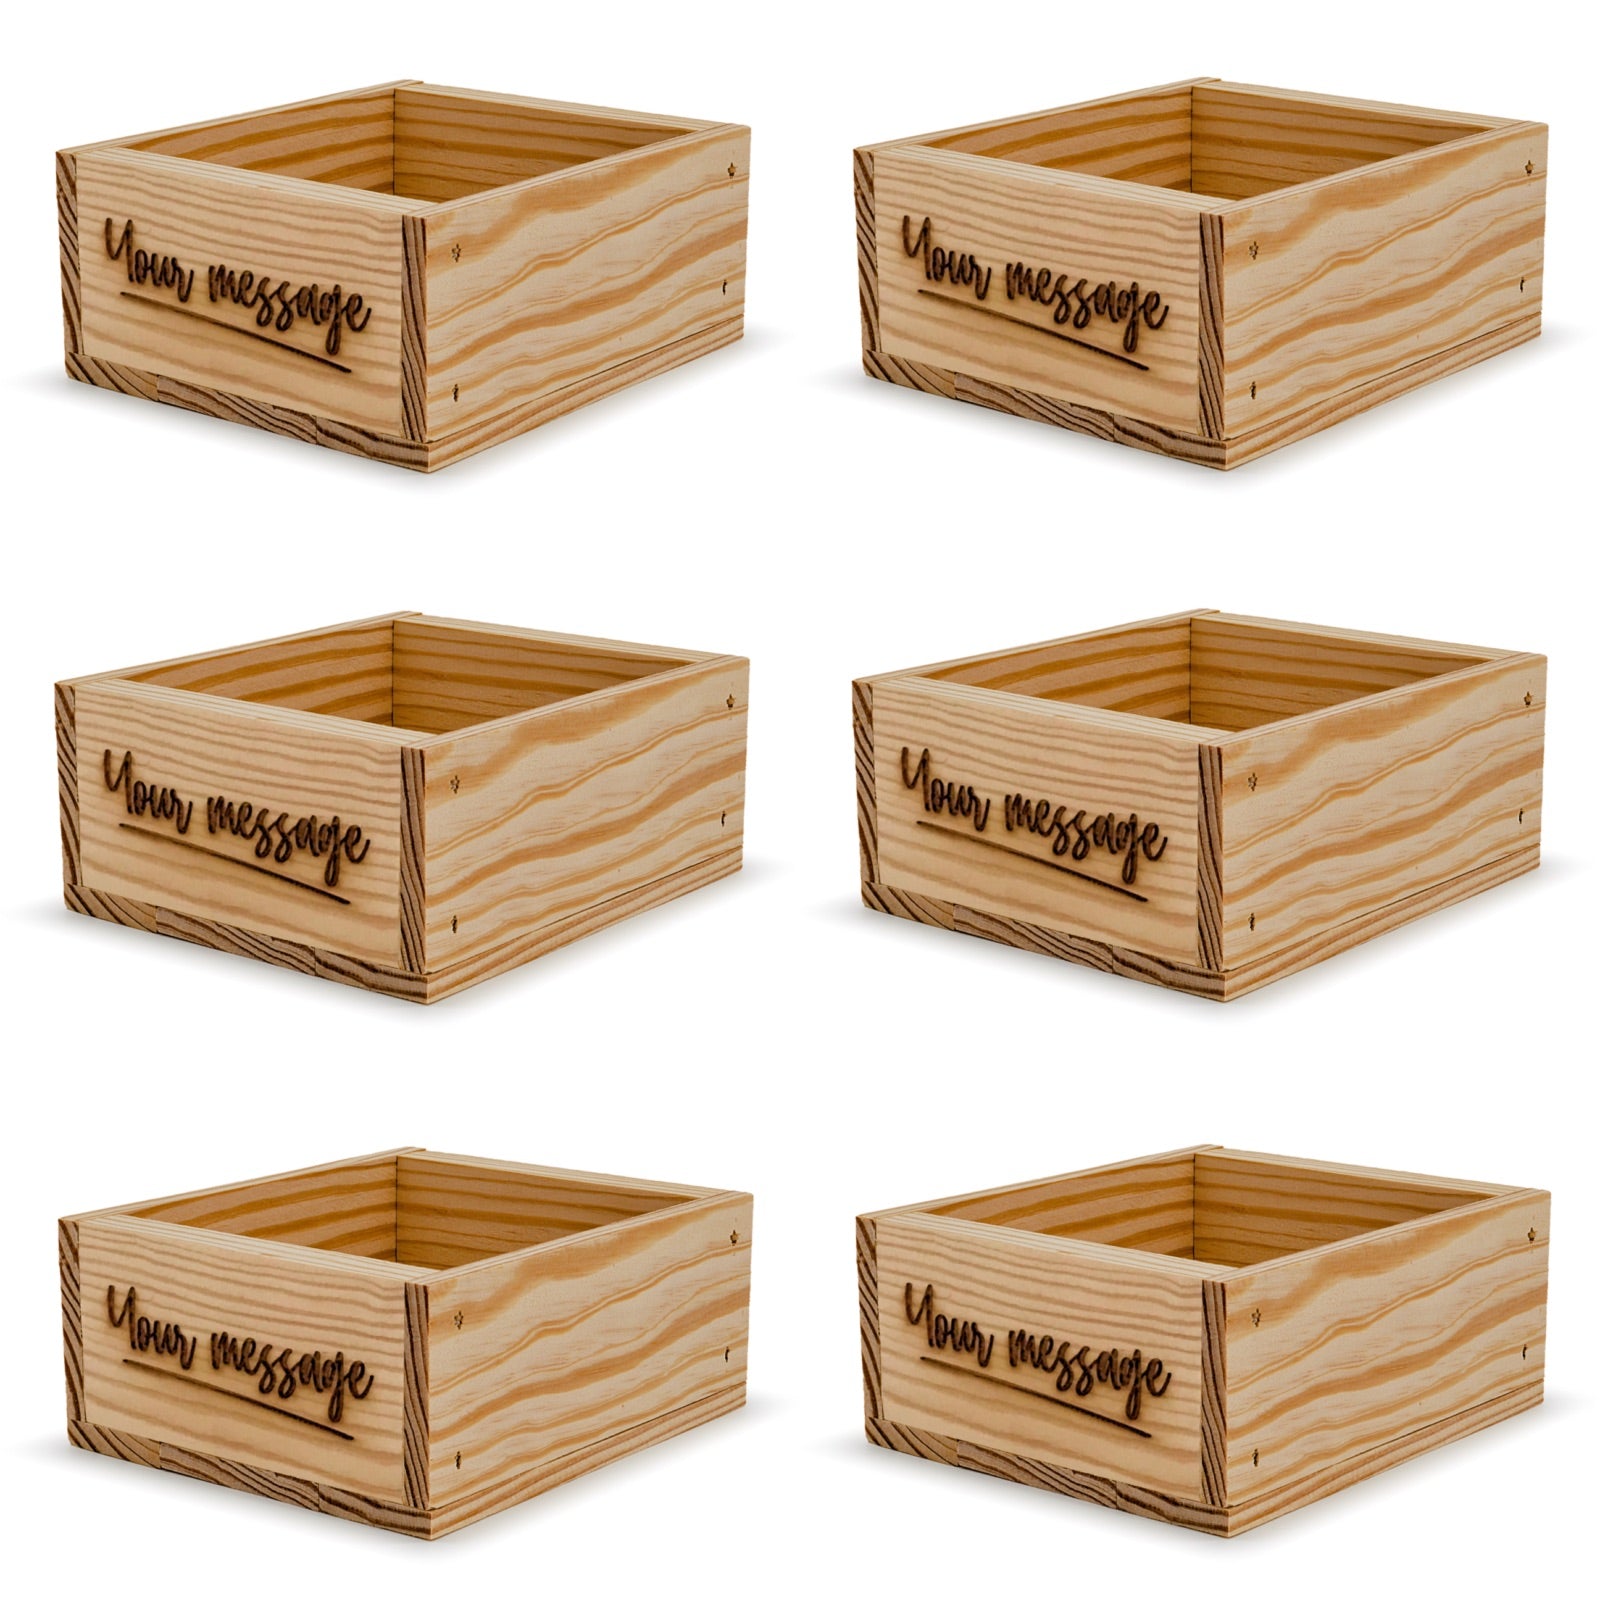 6 Small wooden crates with custom message 6x5.5x2.75